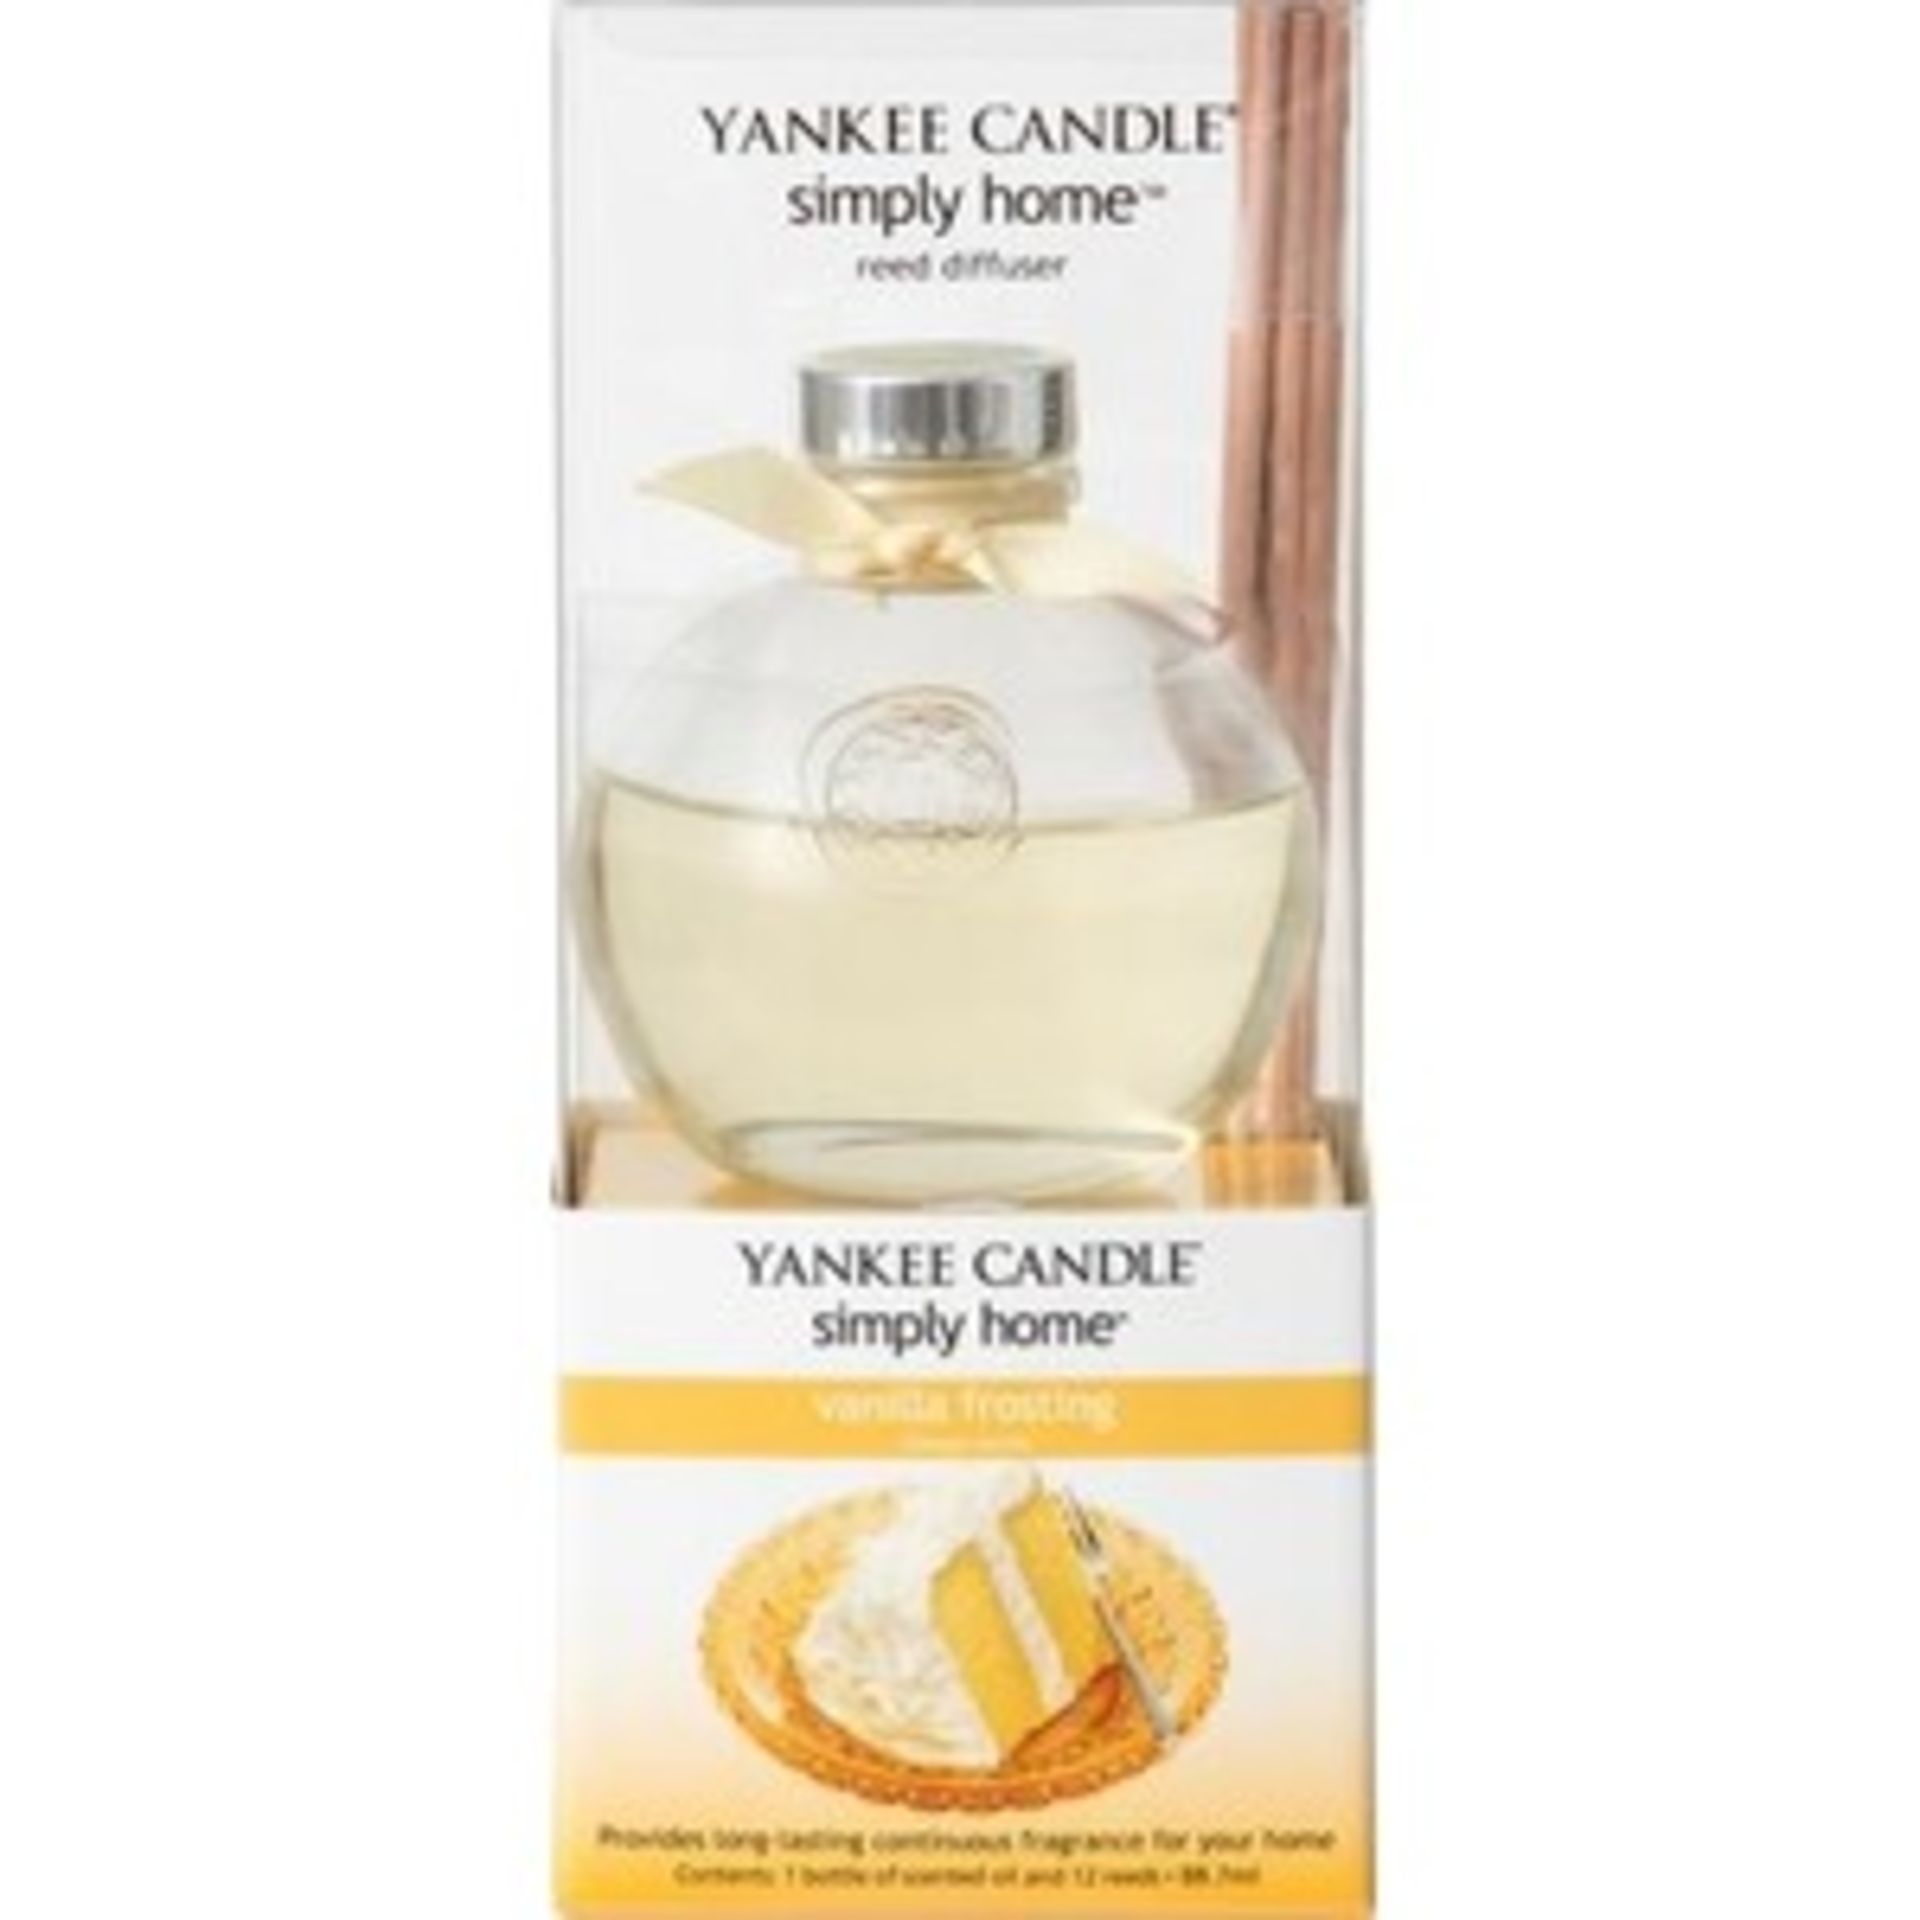 V Brand New Yankee Candle Reed Diffuser Vanilla Frosting Amazon Price £11.99 X 2 YOUR BID PRICE TO